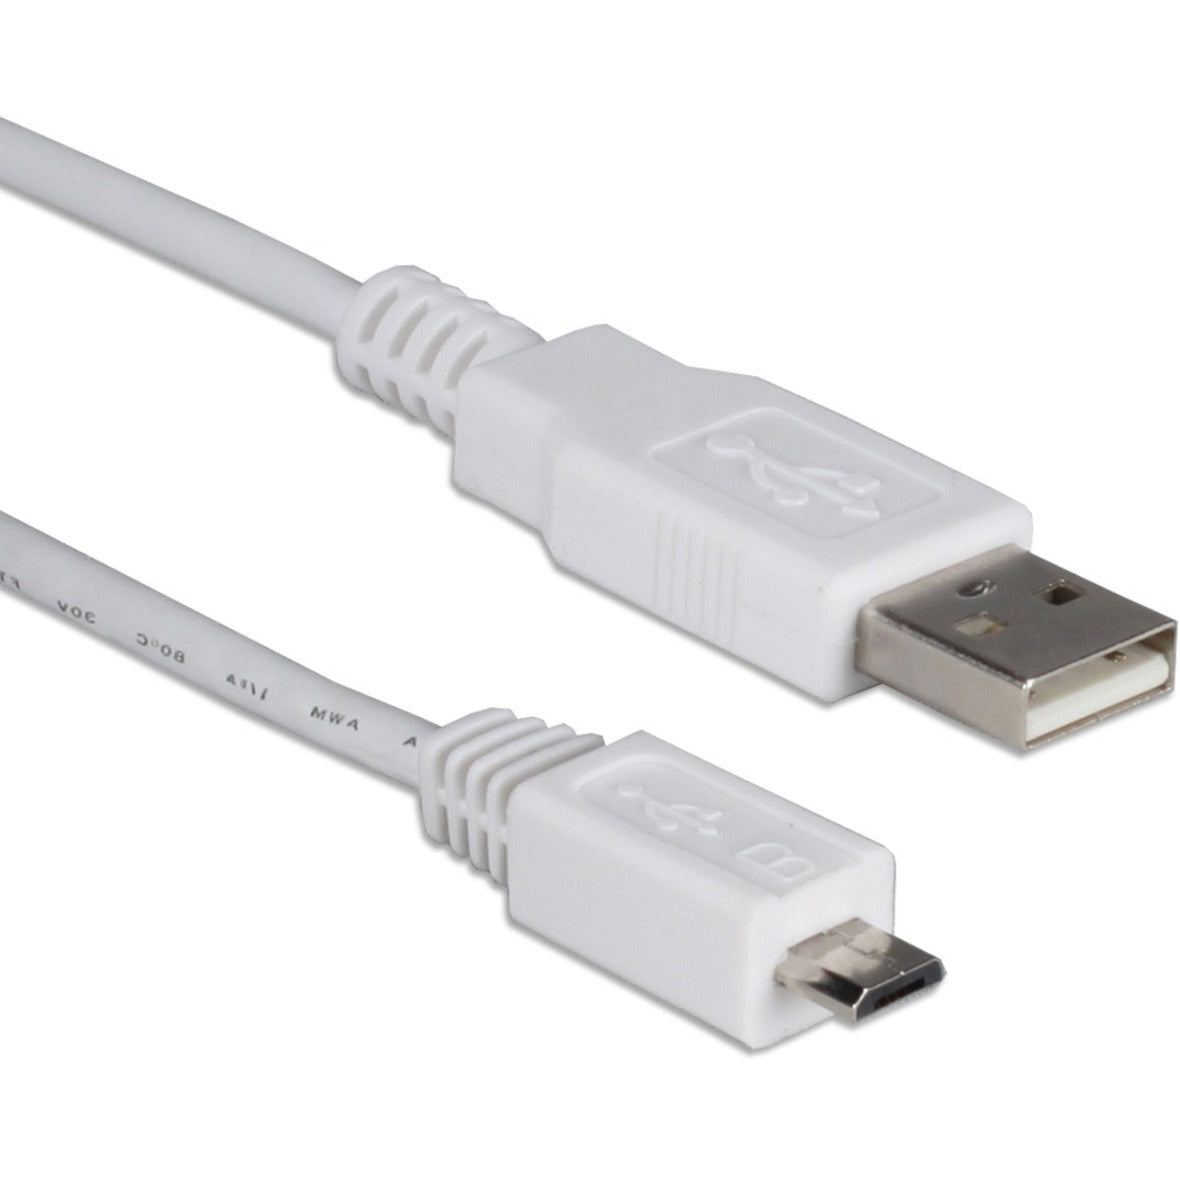 QVS USB1M-05M Micro-USB Sync & Charger Cable for Smartphone, Tablet, MP3, PDA and GPS